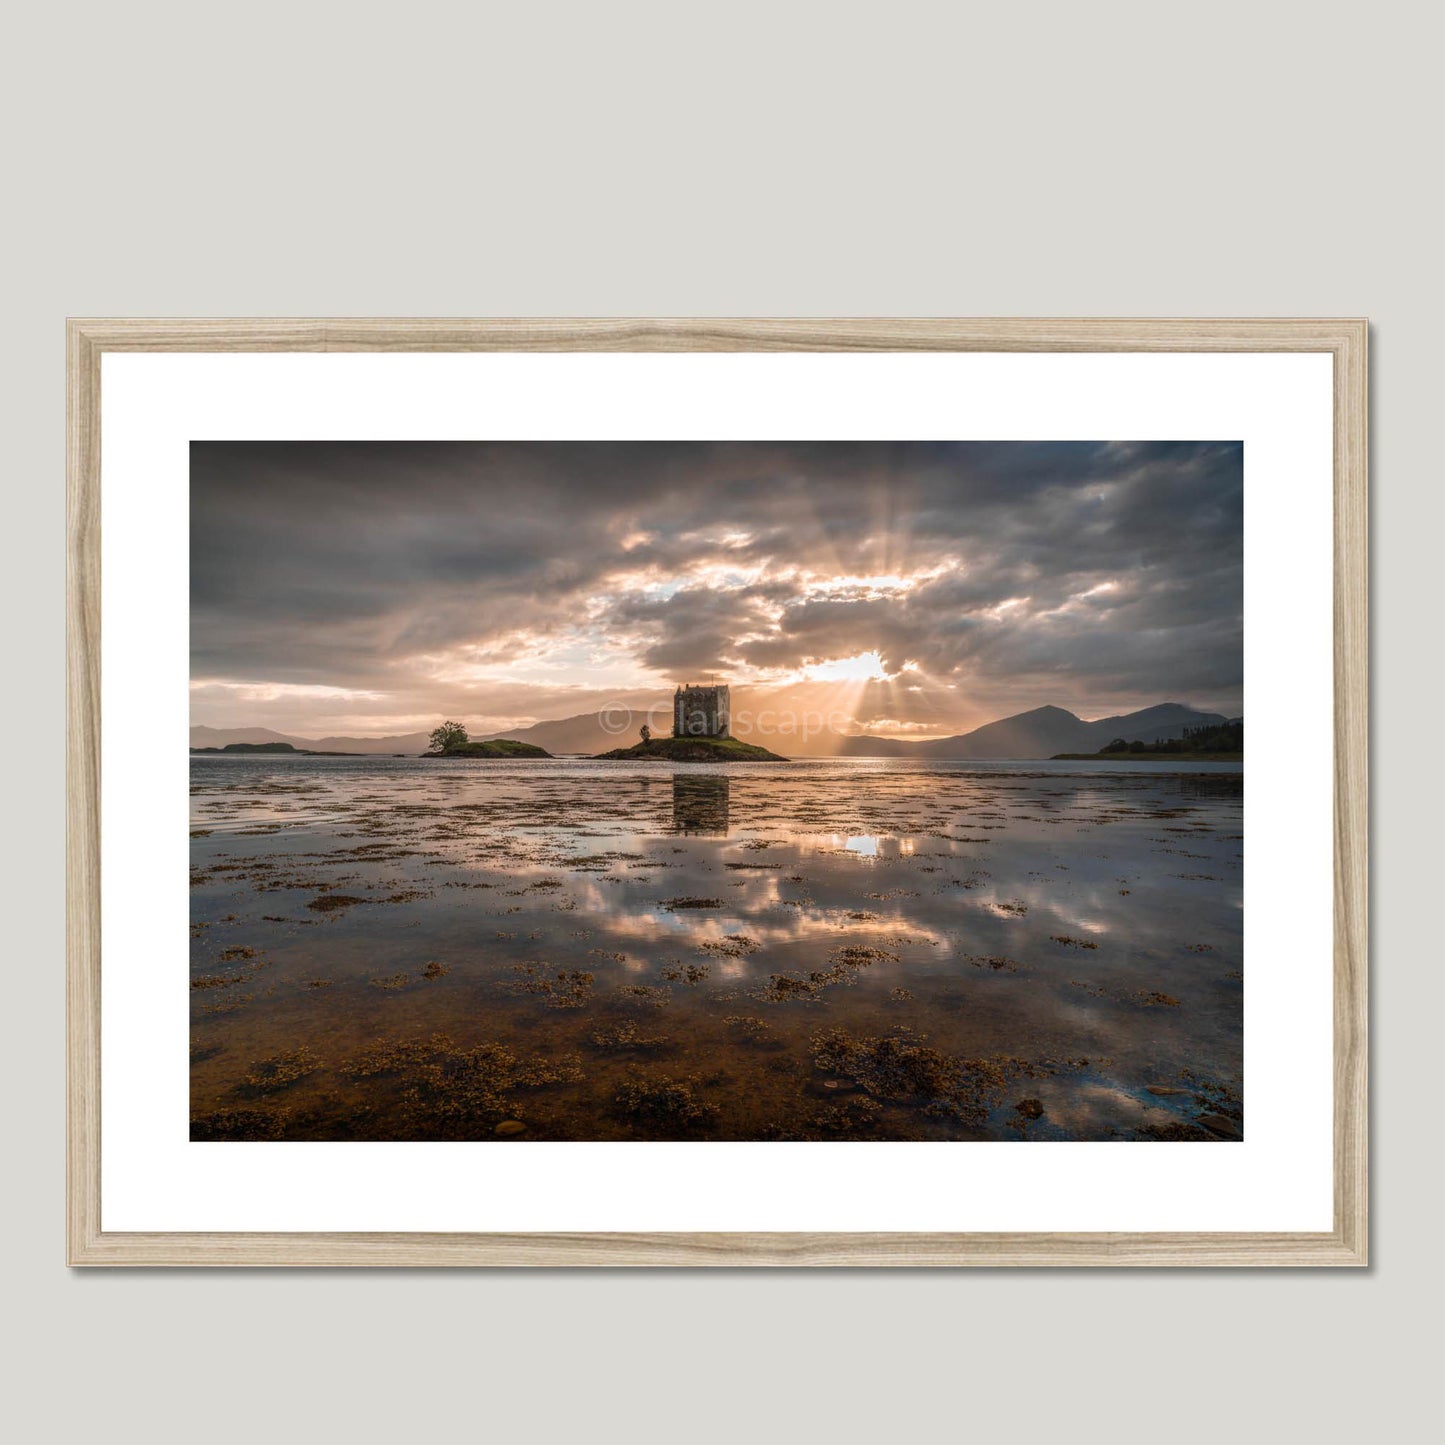 Clan Stewart of Appin - Castle Stalker - Framed & Mounted Photo Print 28"x20" Natural